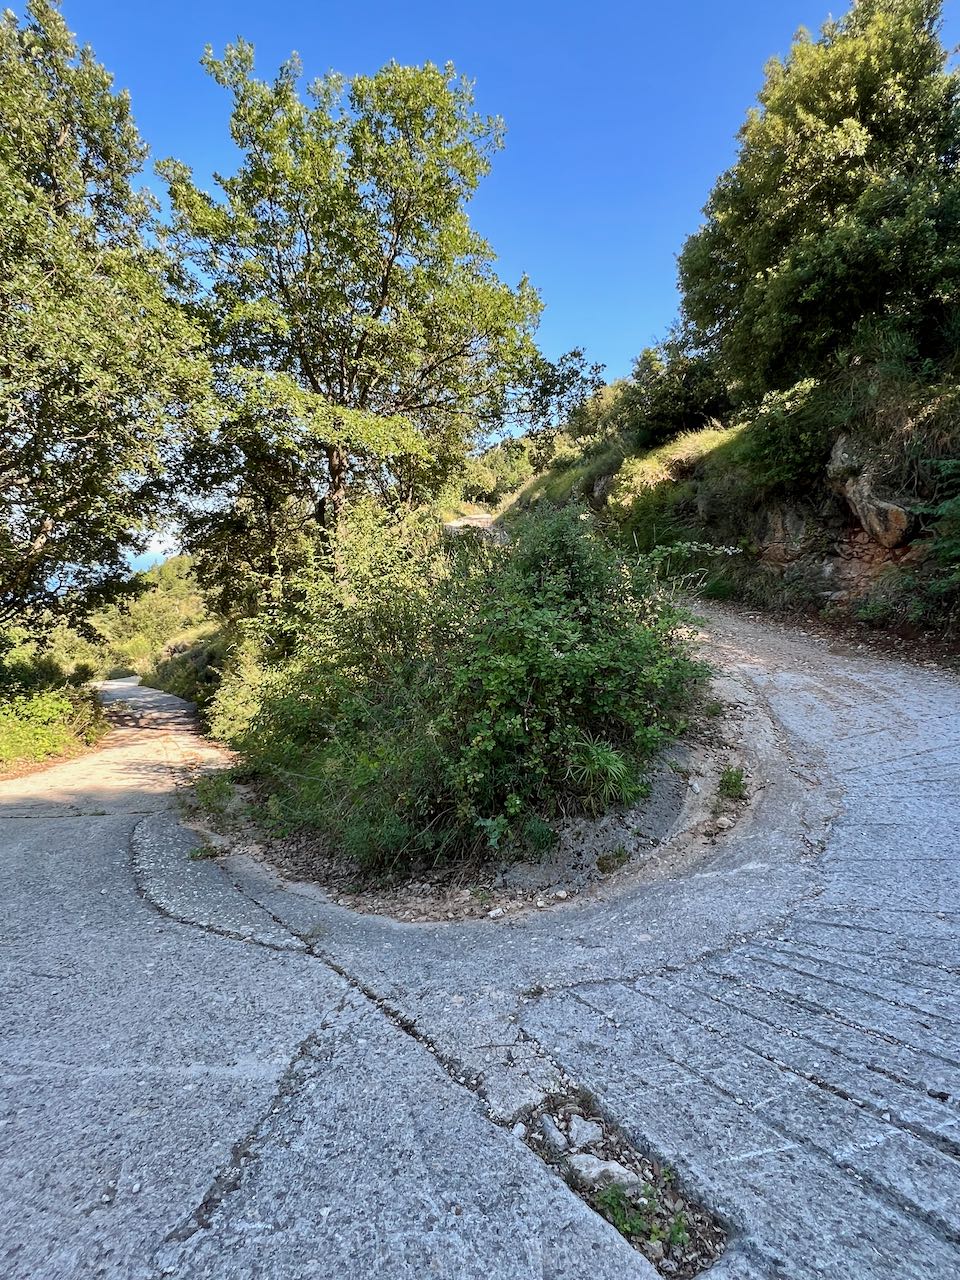 Switchback of semi-paved section of trail along the Col du Mont Gros near Menton, France